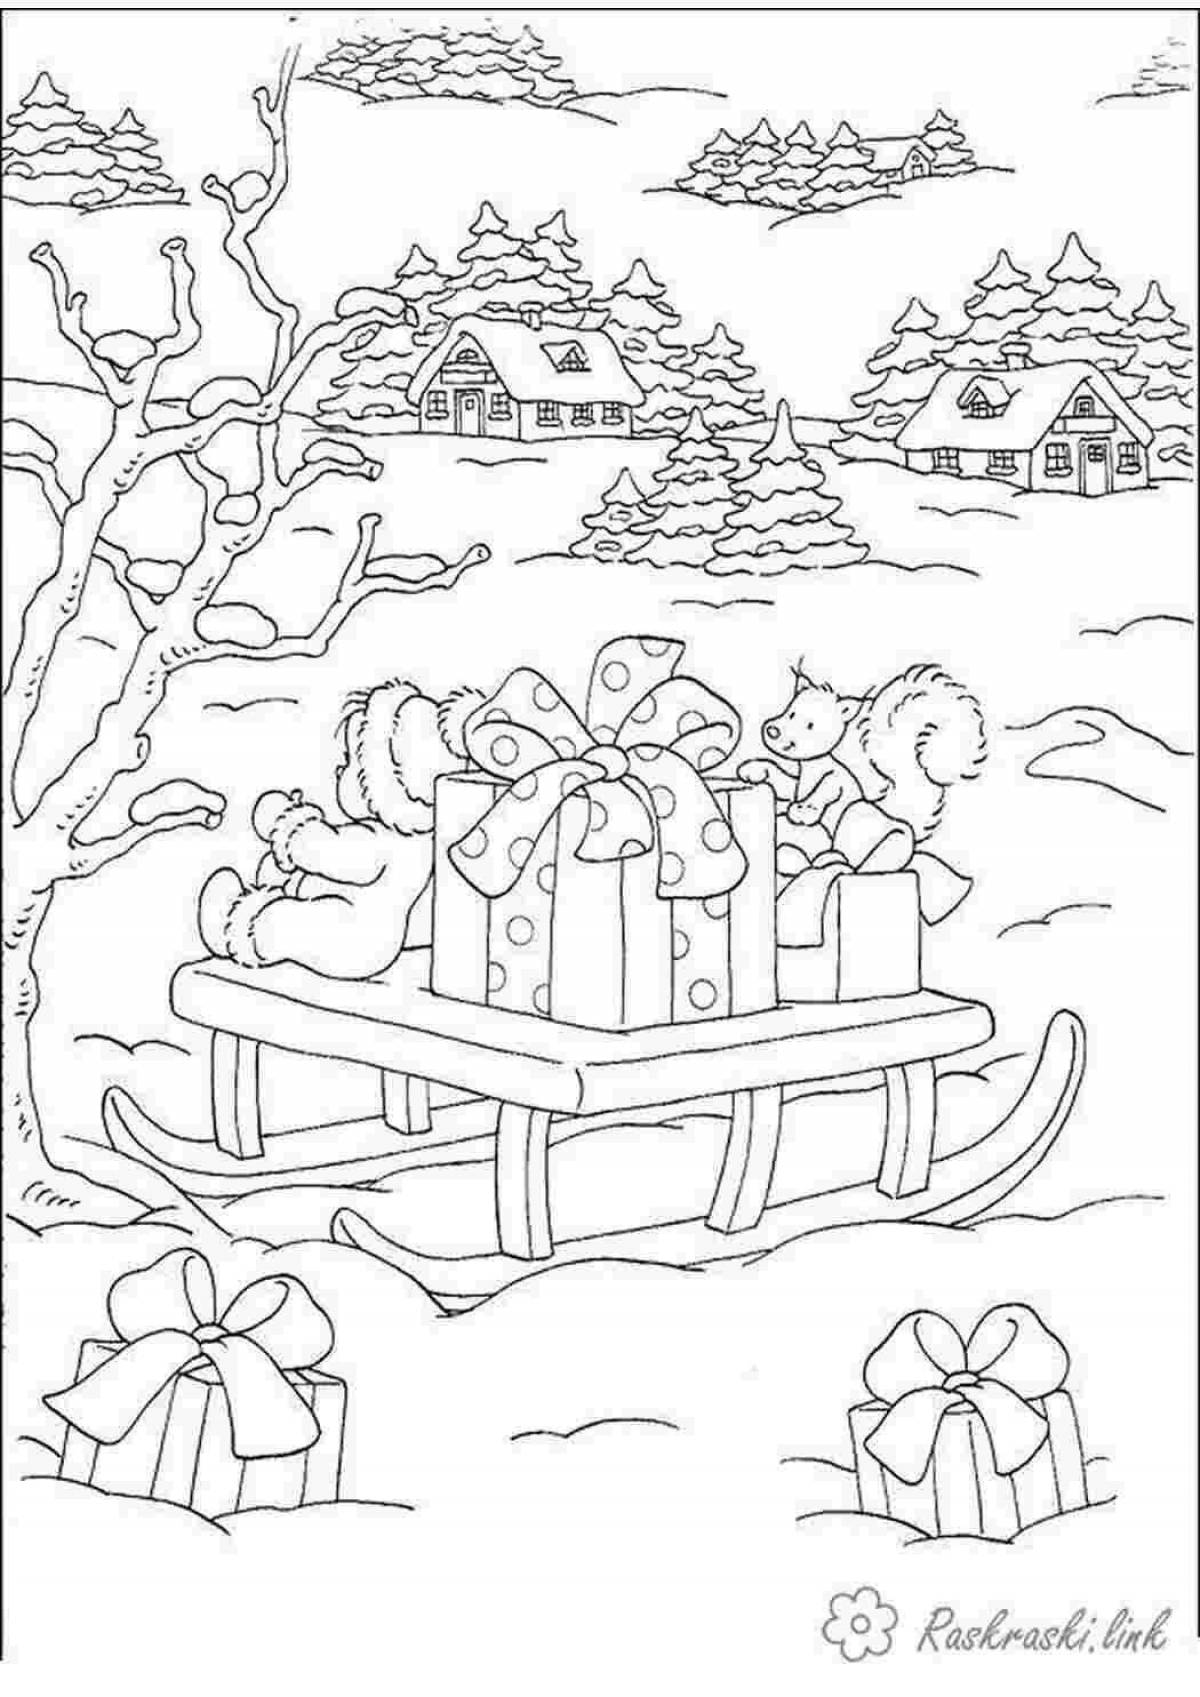 Bright Christmas story coloring book